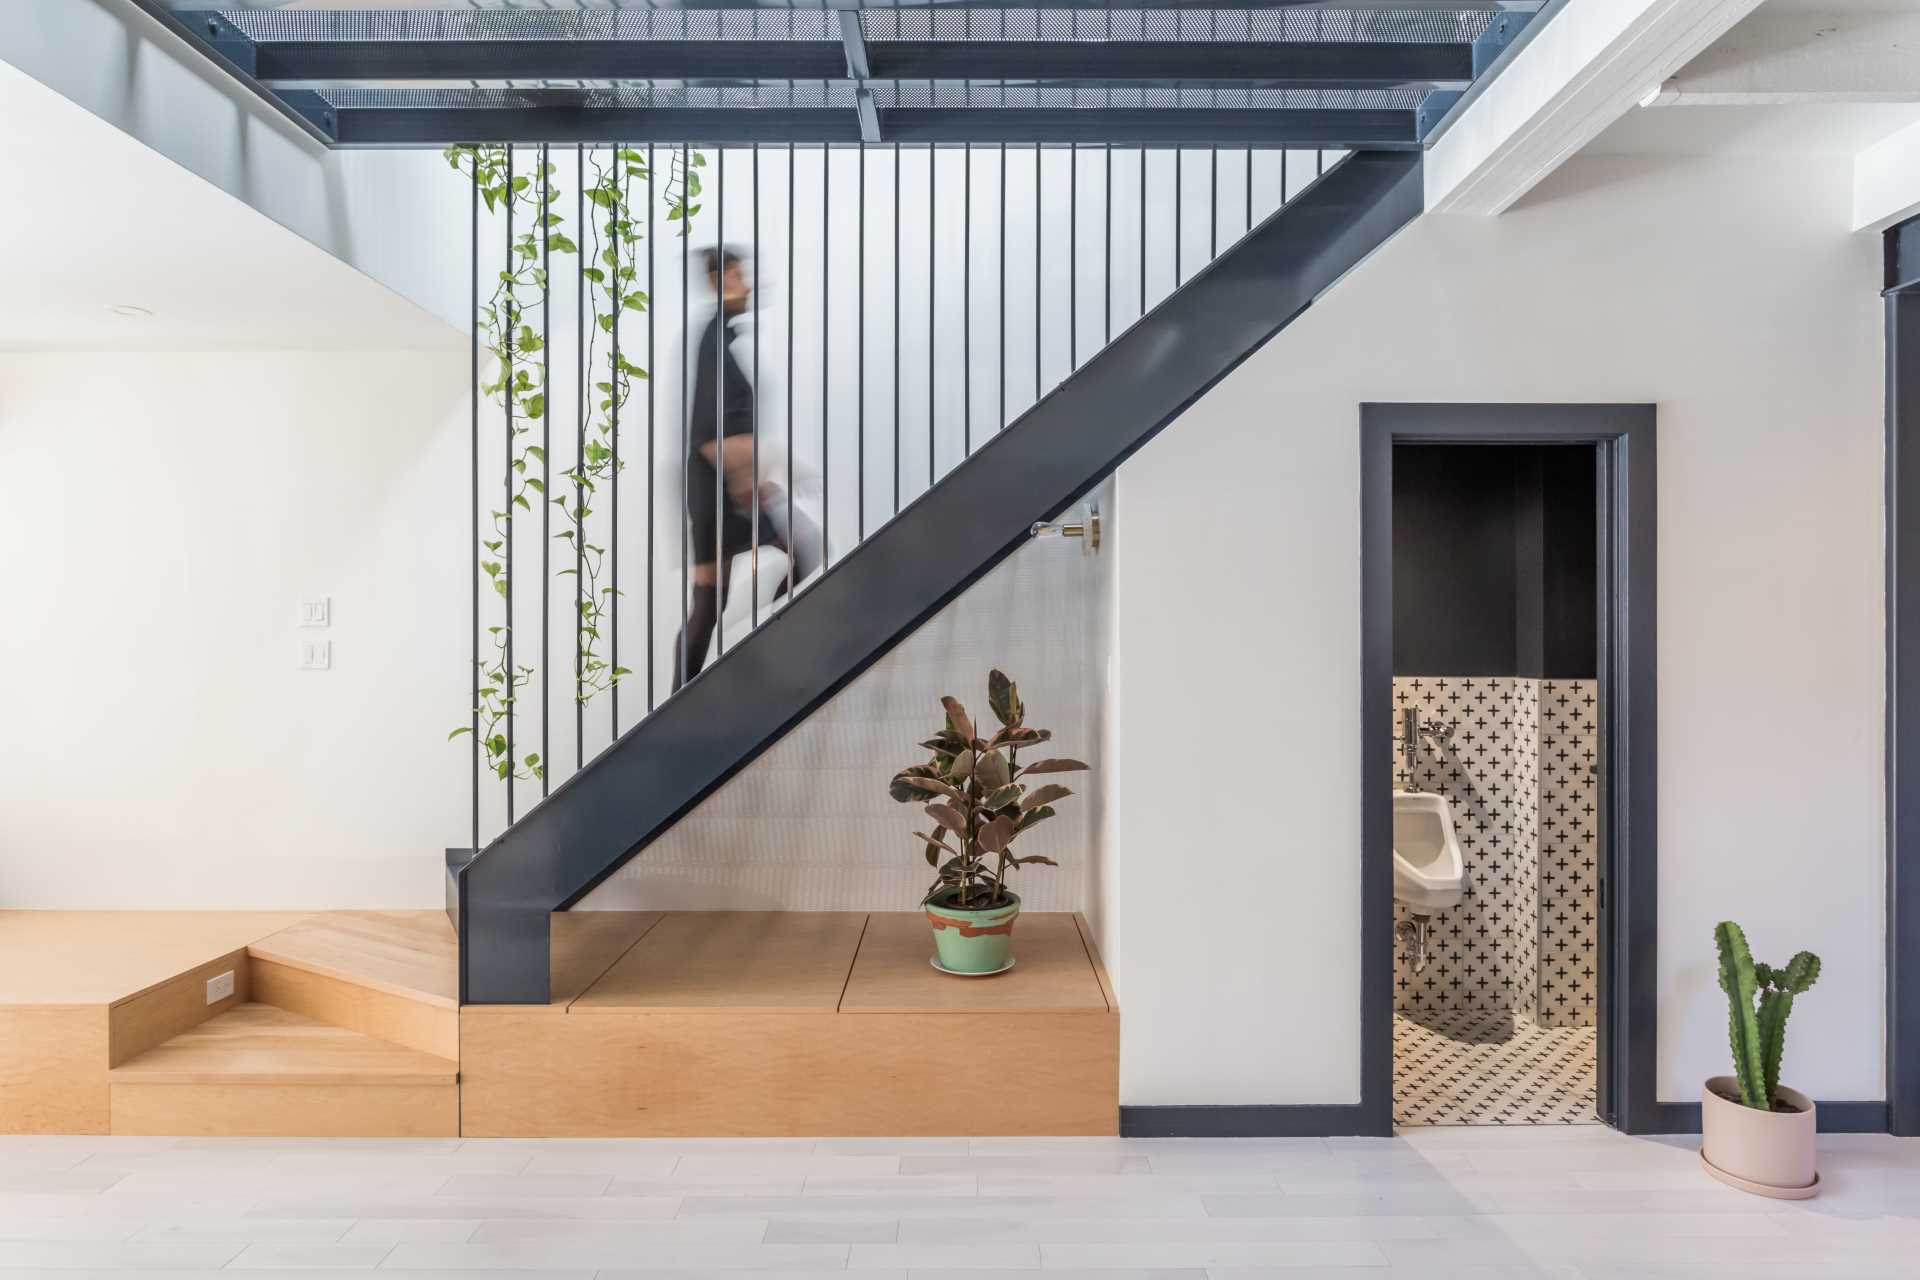 Opposite the kitchen is a wood platform that's home to a couch and leads to the steel stairs. A powder room with patterned tiles has been tucked away underneath the stairs.